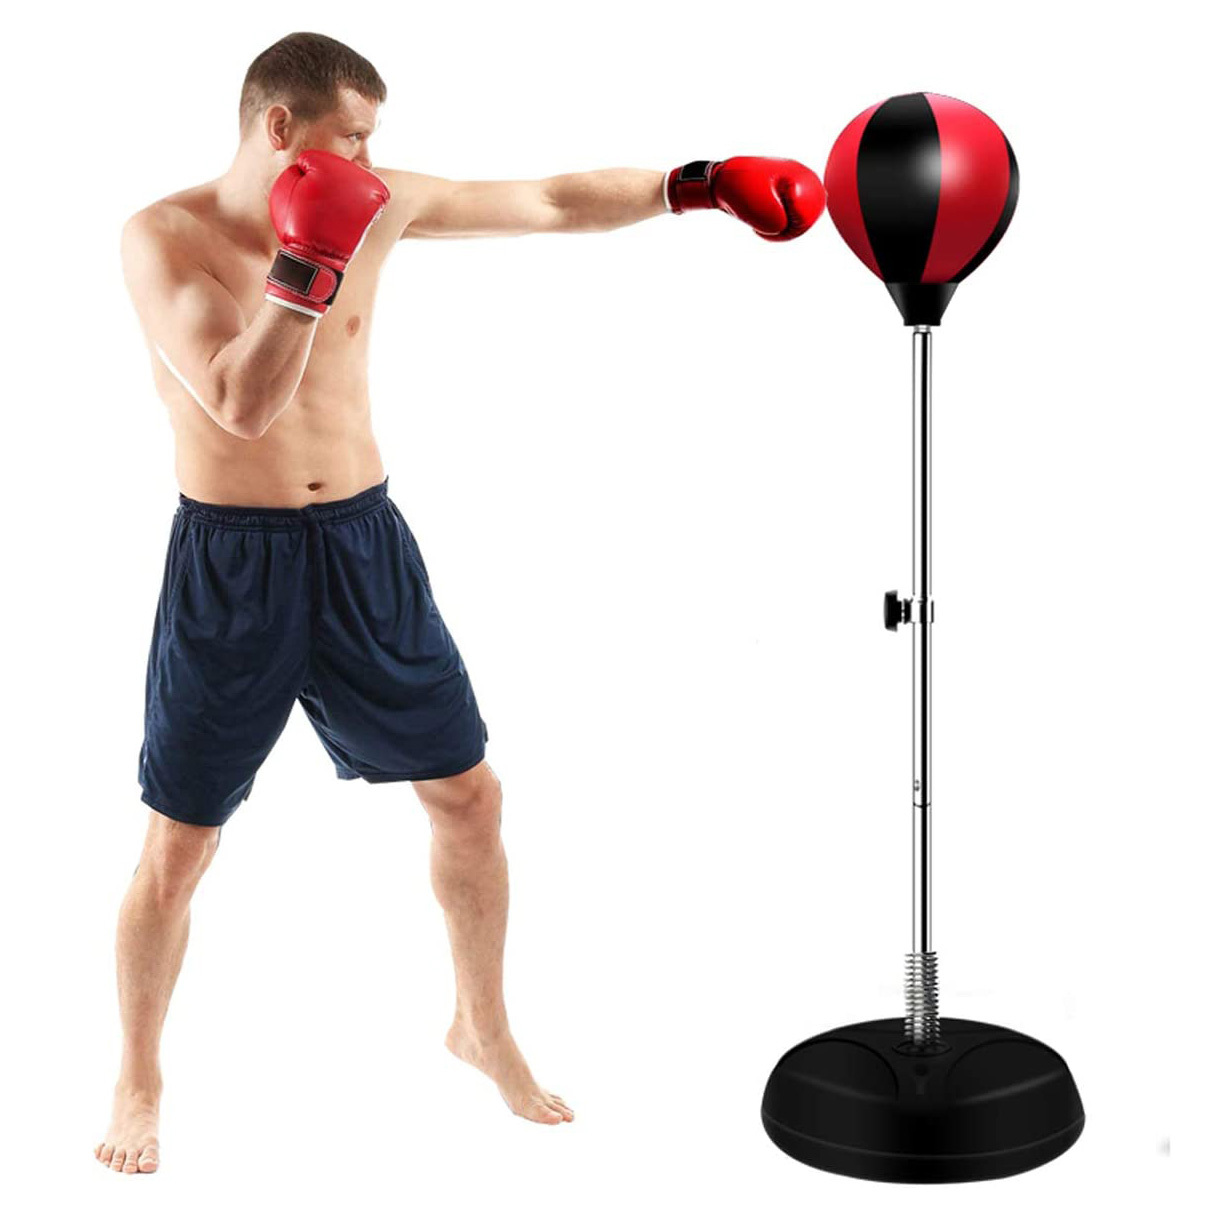 Adult Speed Ball Stand Punching Boxing Bag Glove Set